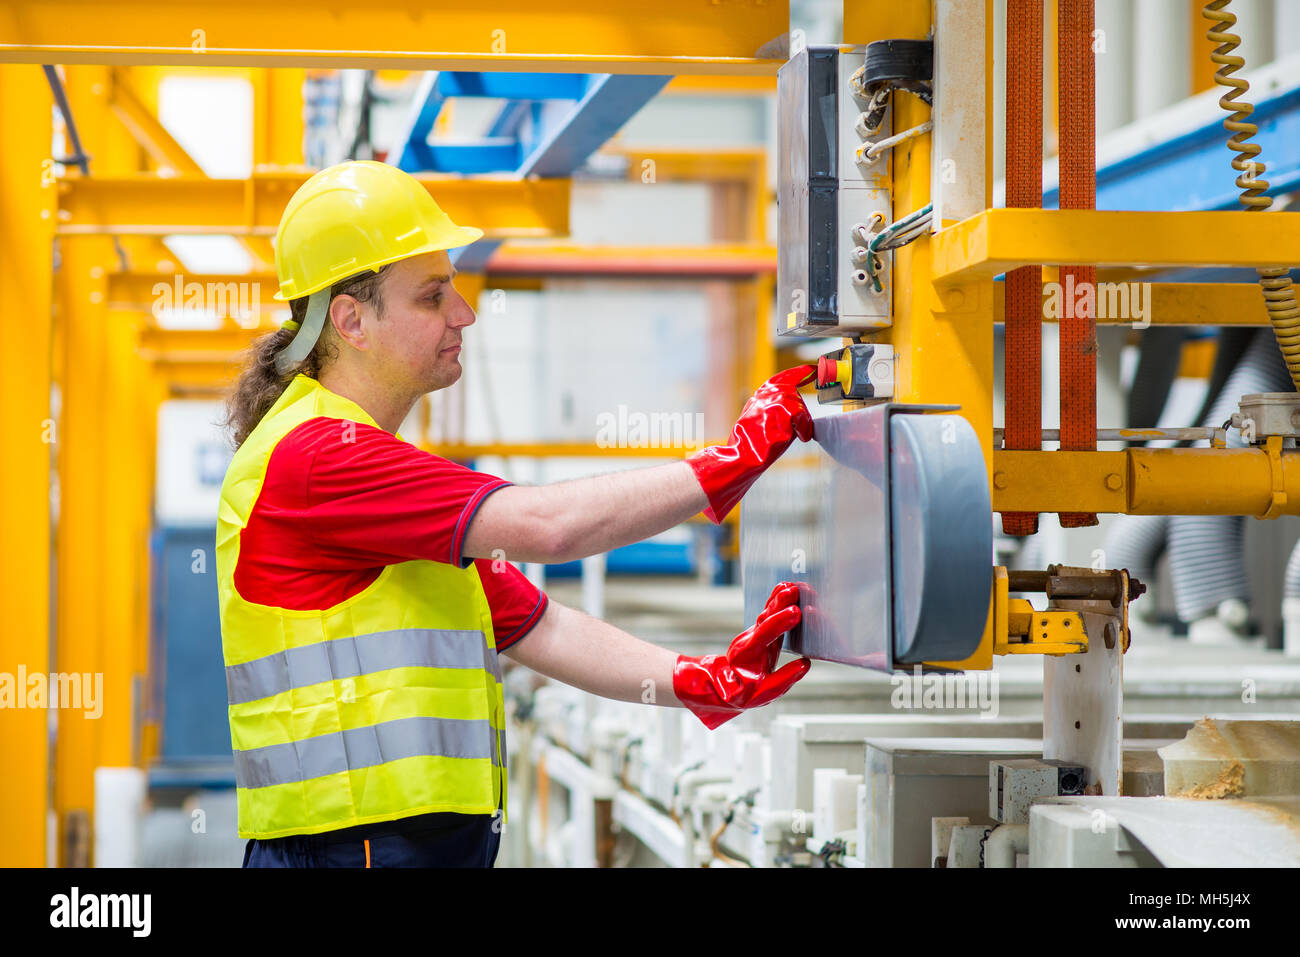 Worker in a factory pressing a red button. Worker wearing yellow reflective suit, yellow helmet and red working gloves Stock Photo